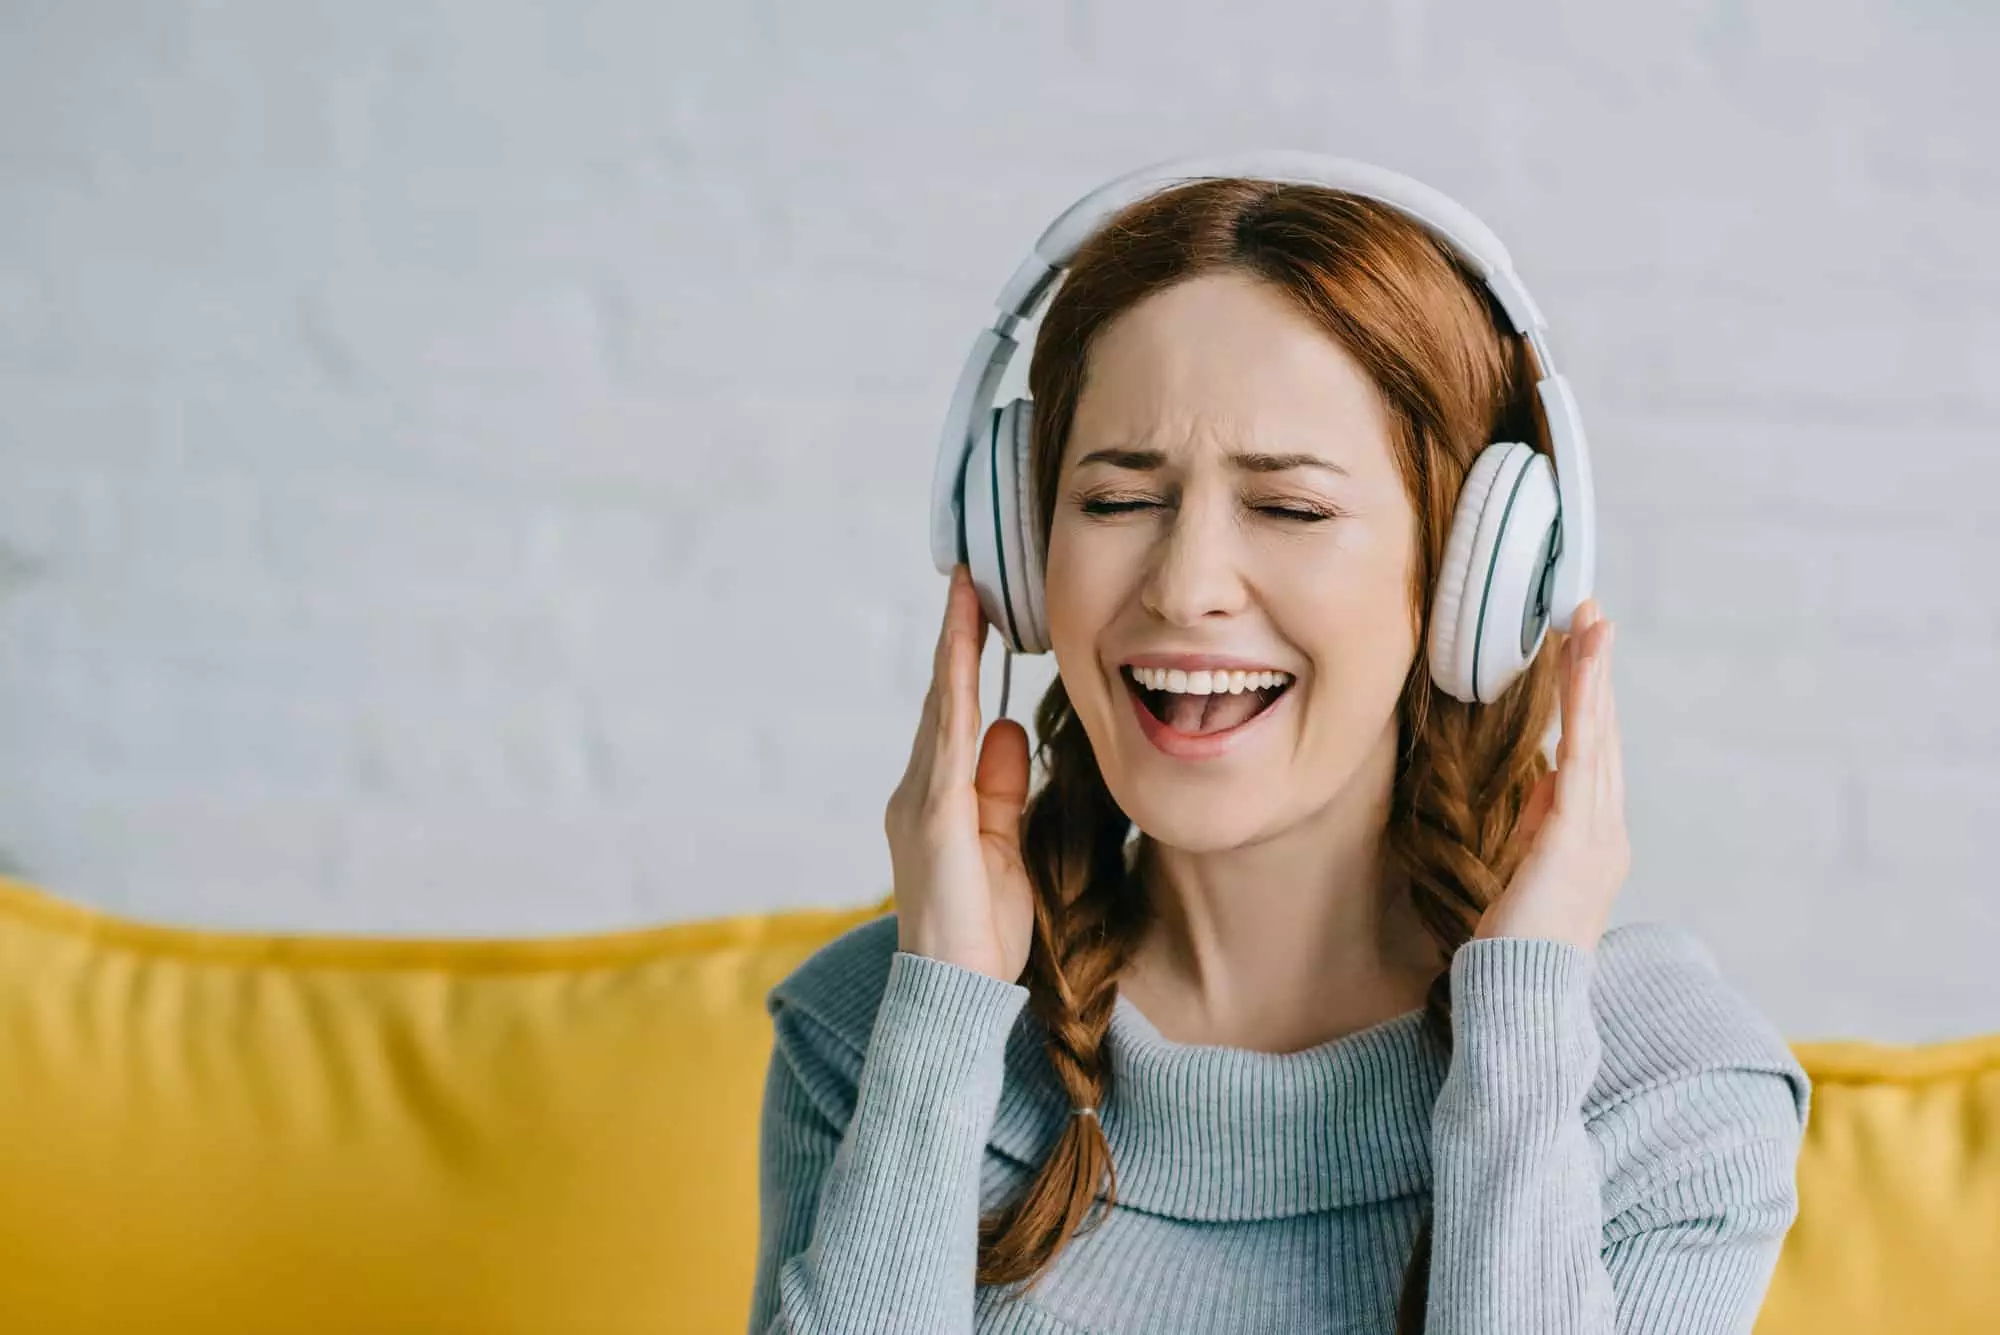 17 Laugh-Out-Loud Mom Podcast Options That Every Mom Needs - Made In A Pinch